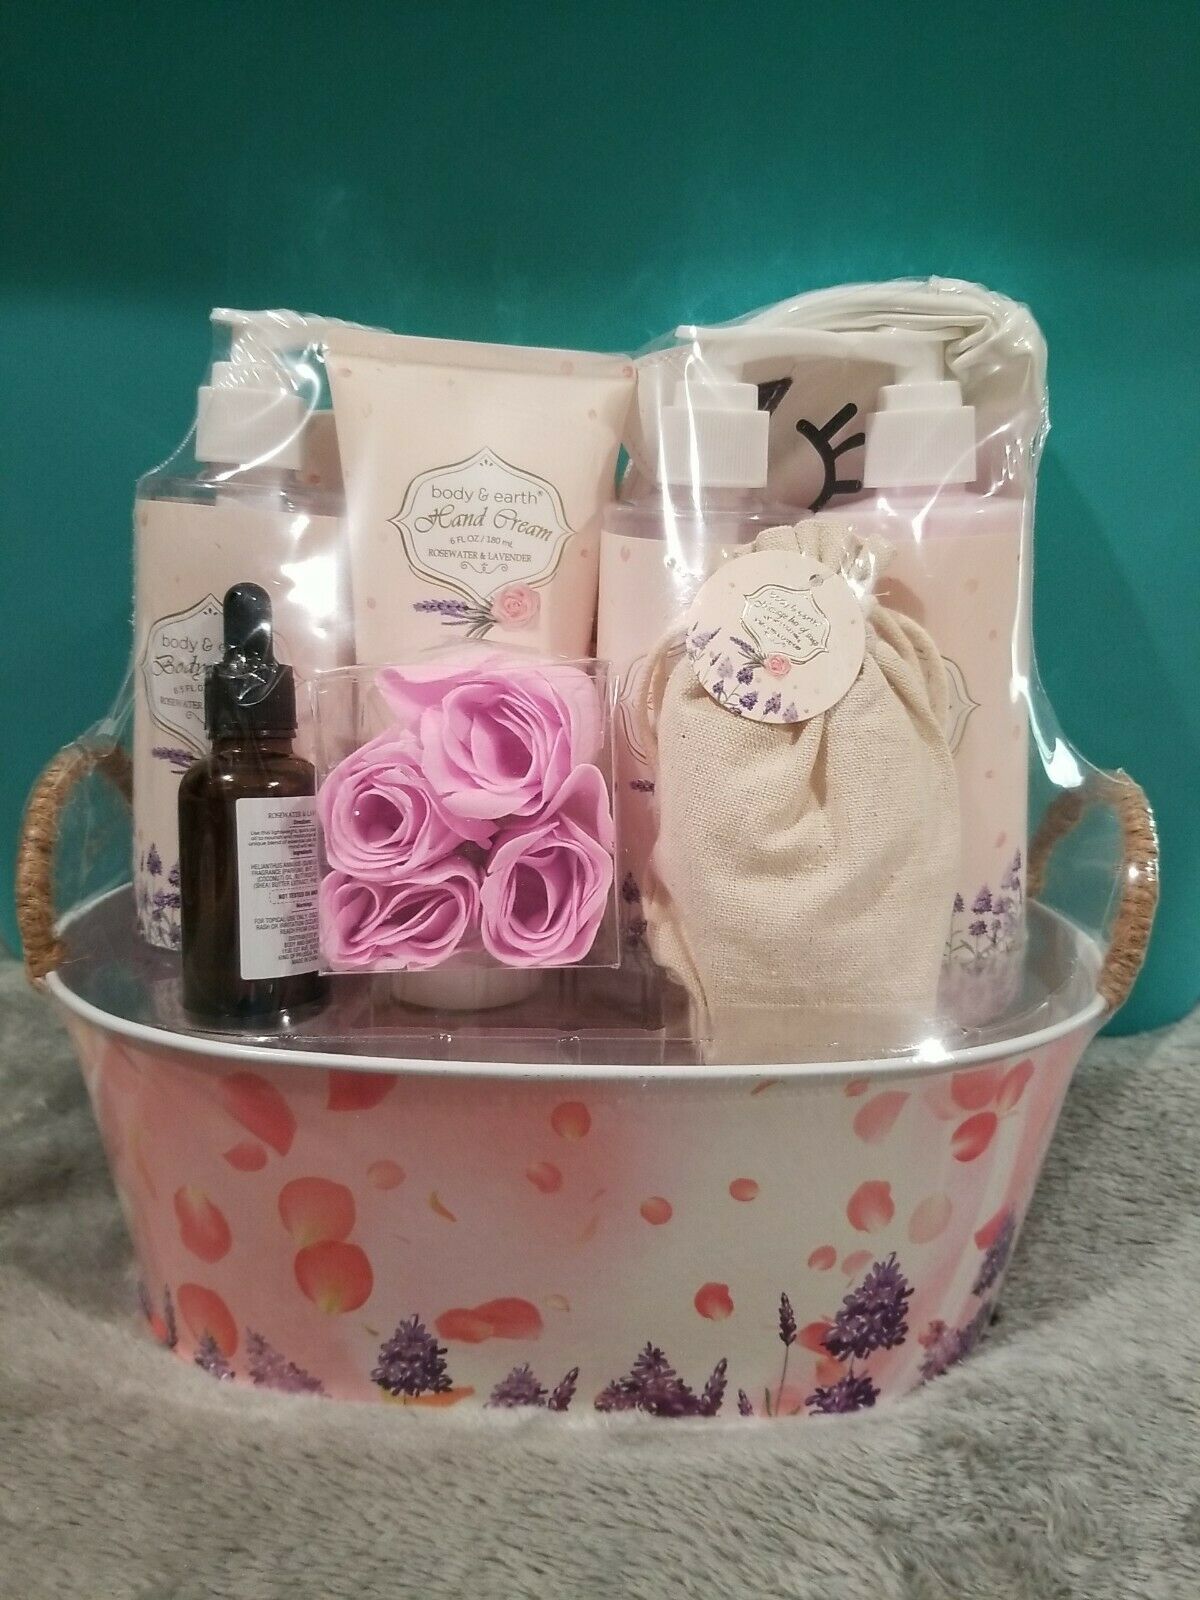 Gift Basket Rosewater & Lavender 11pc Luxury Spa Bath Set. Great Gift For Mom!